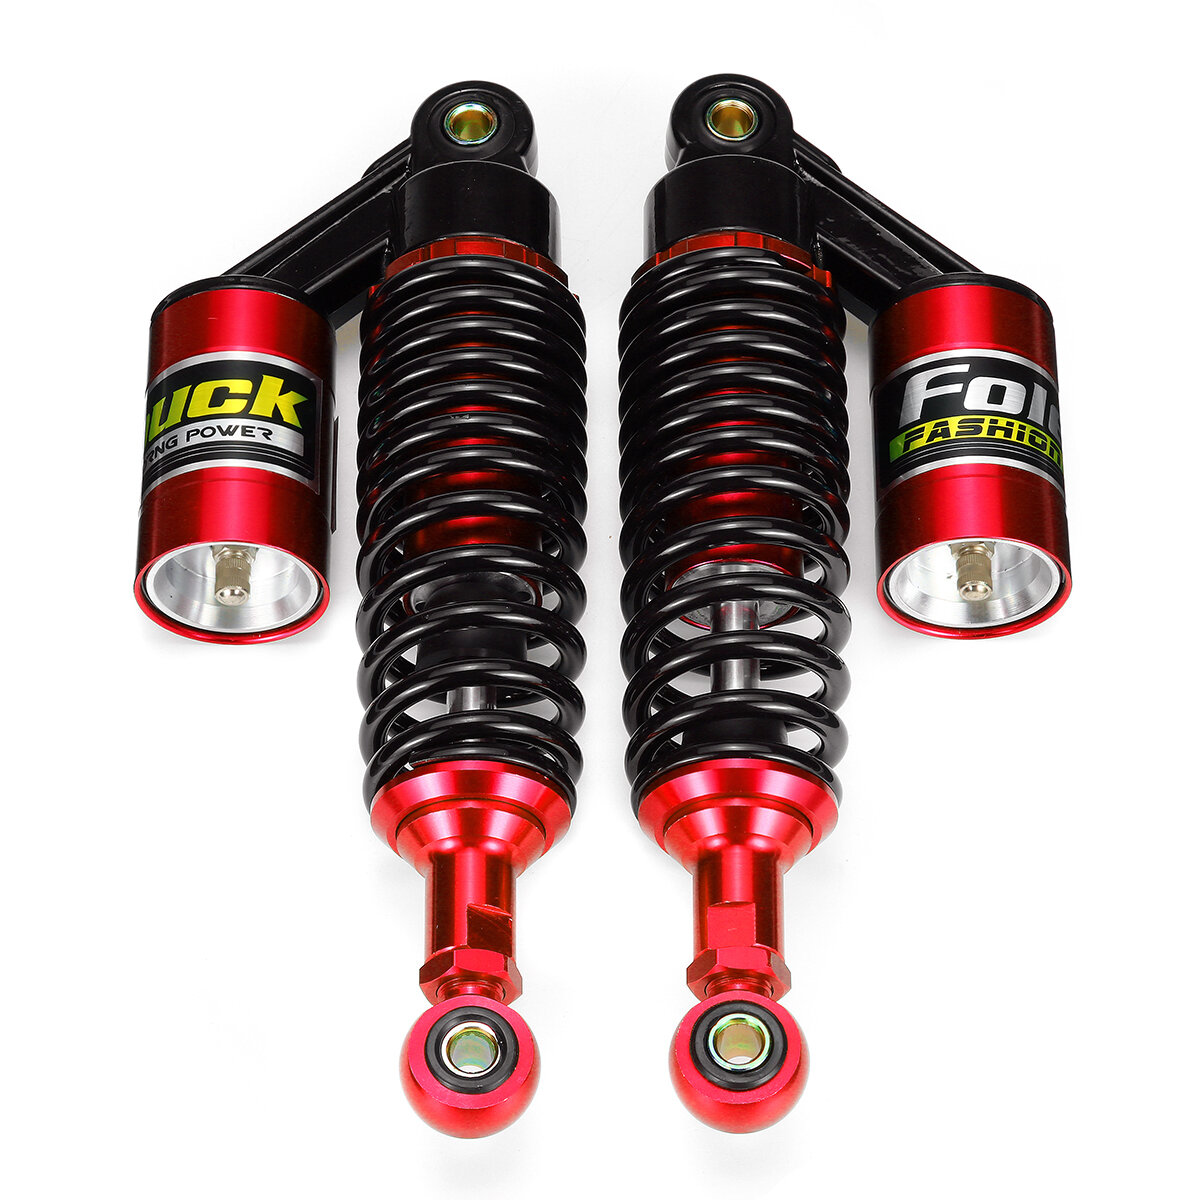 

280mm/11" Universal Motorcycle Air Shock Absorber Rear Suspension For Yamaha Motor Scooter ATV Quad Dirt Bike